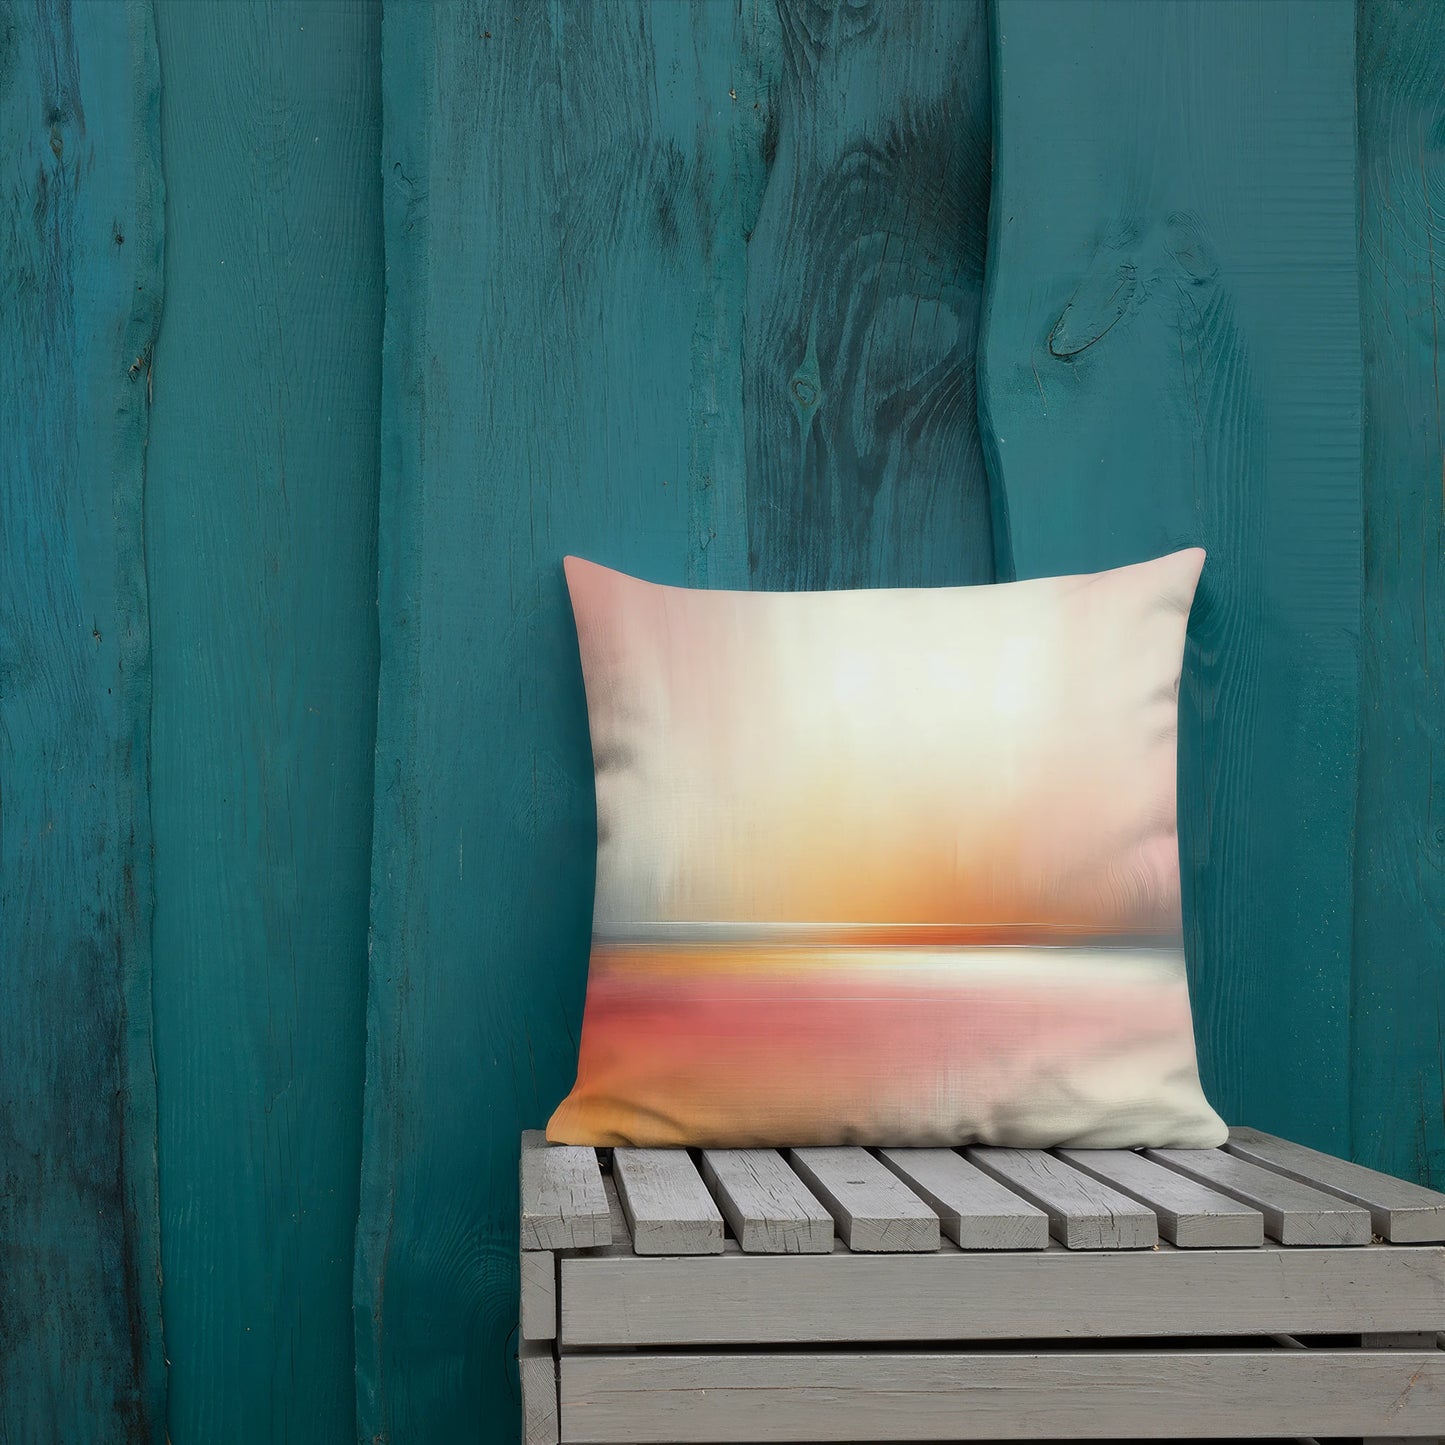 Abstract Art Pillow: The Serenity of Now